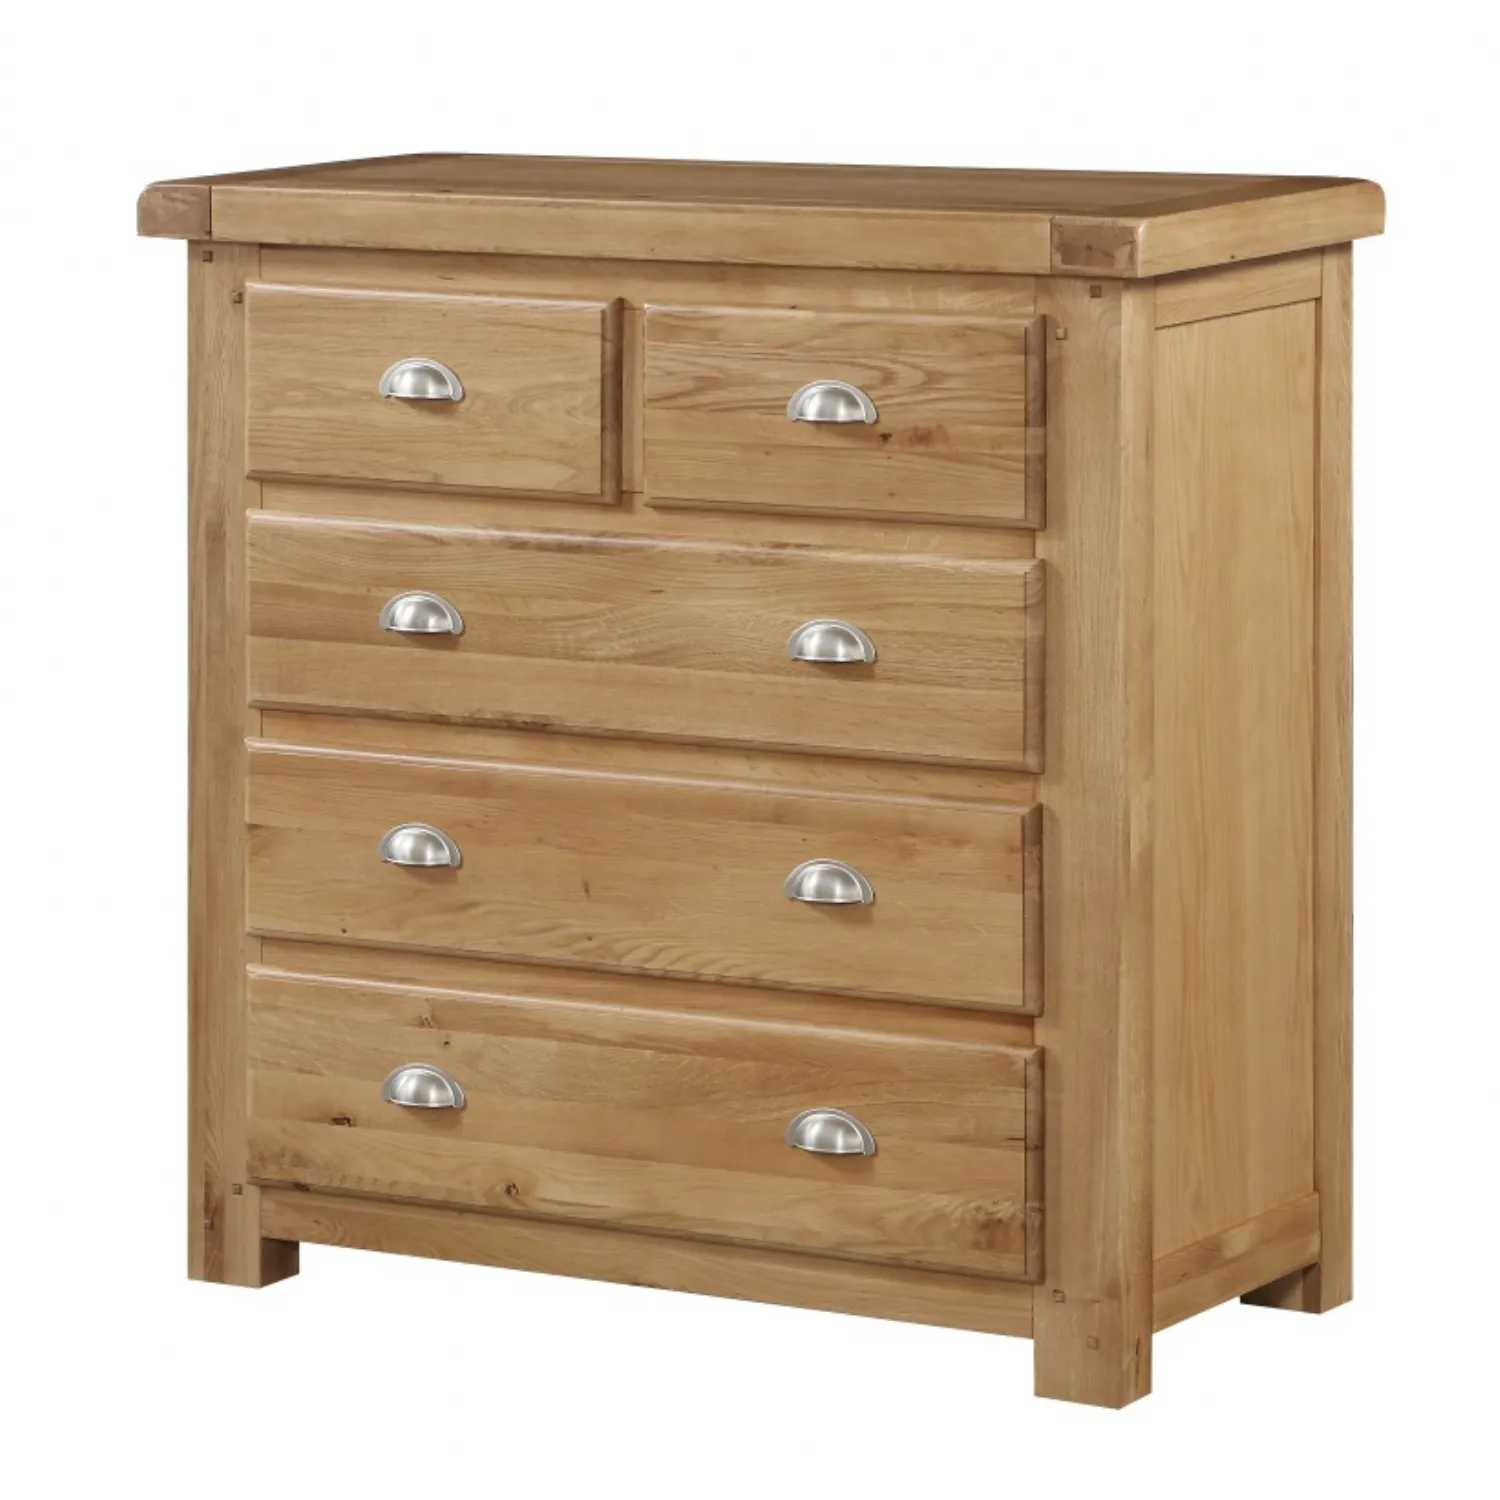 Solid Oak 2 over 3 Chest of Drawers with Chrome Handles